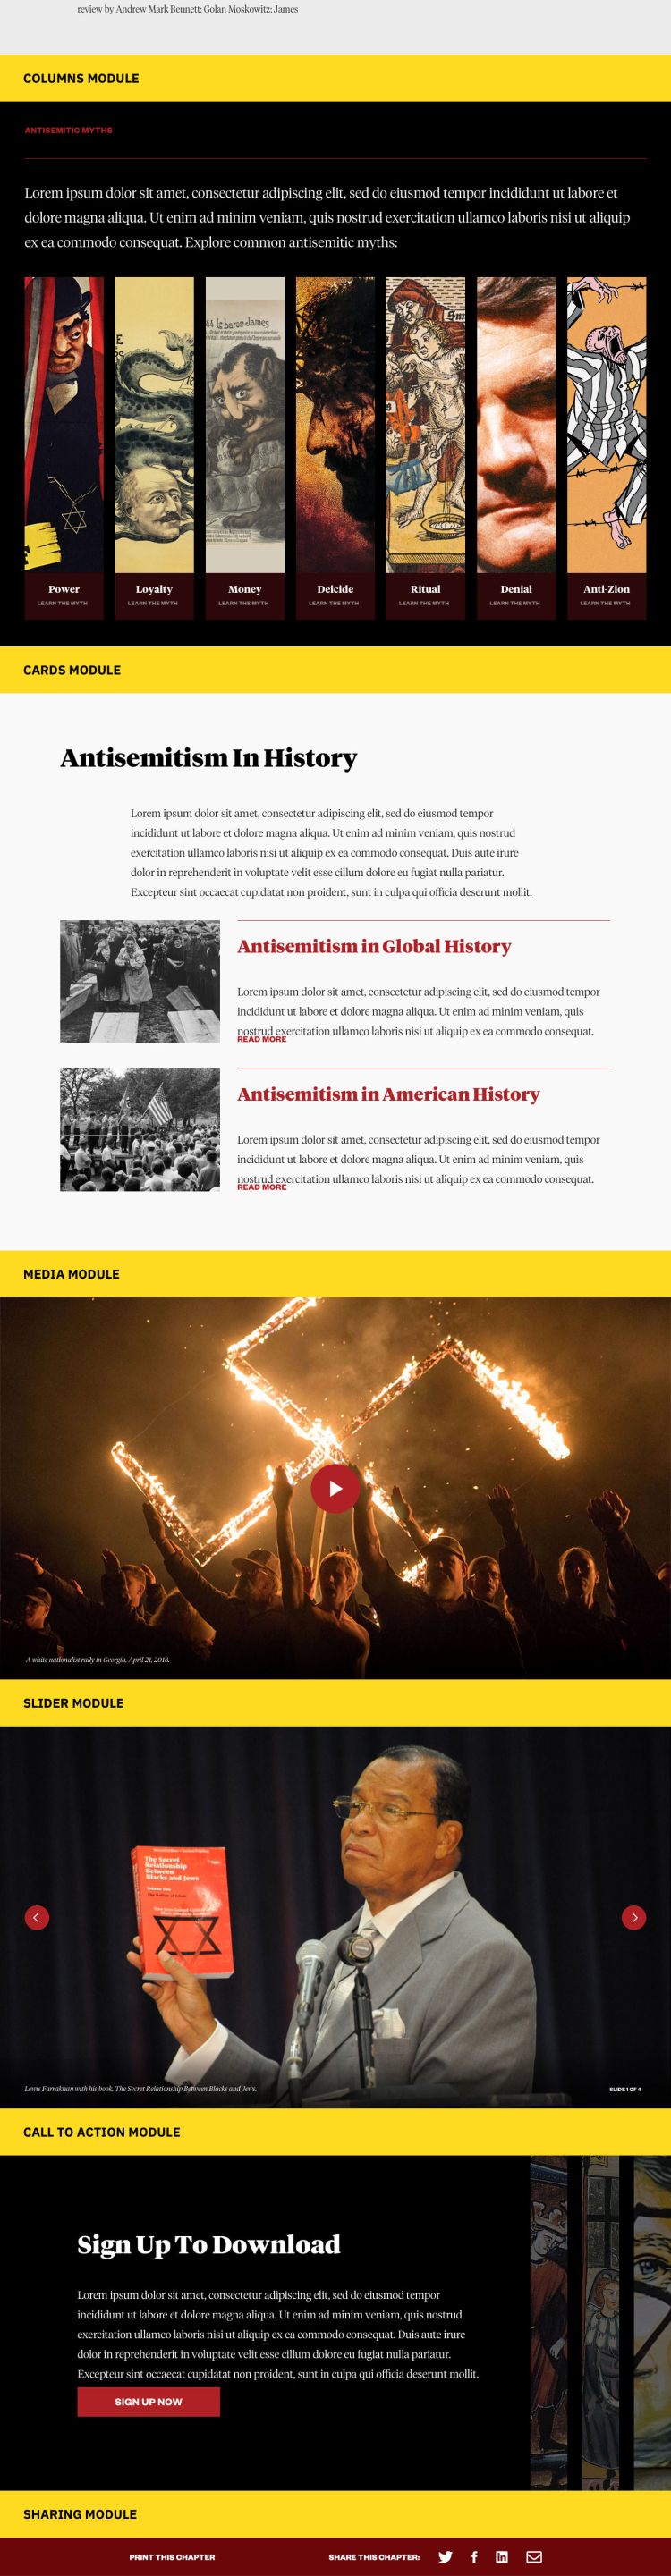 Module guide for the Antisemitism Uncovered website